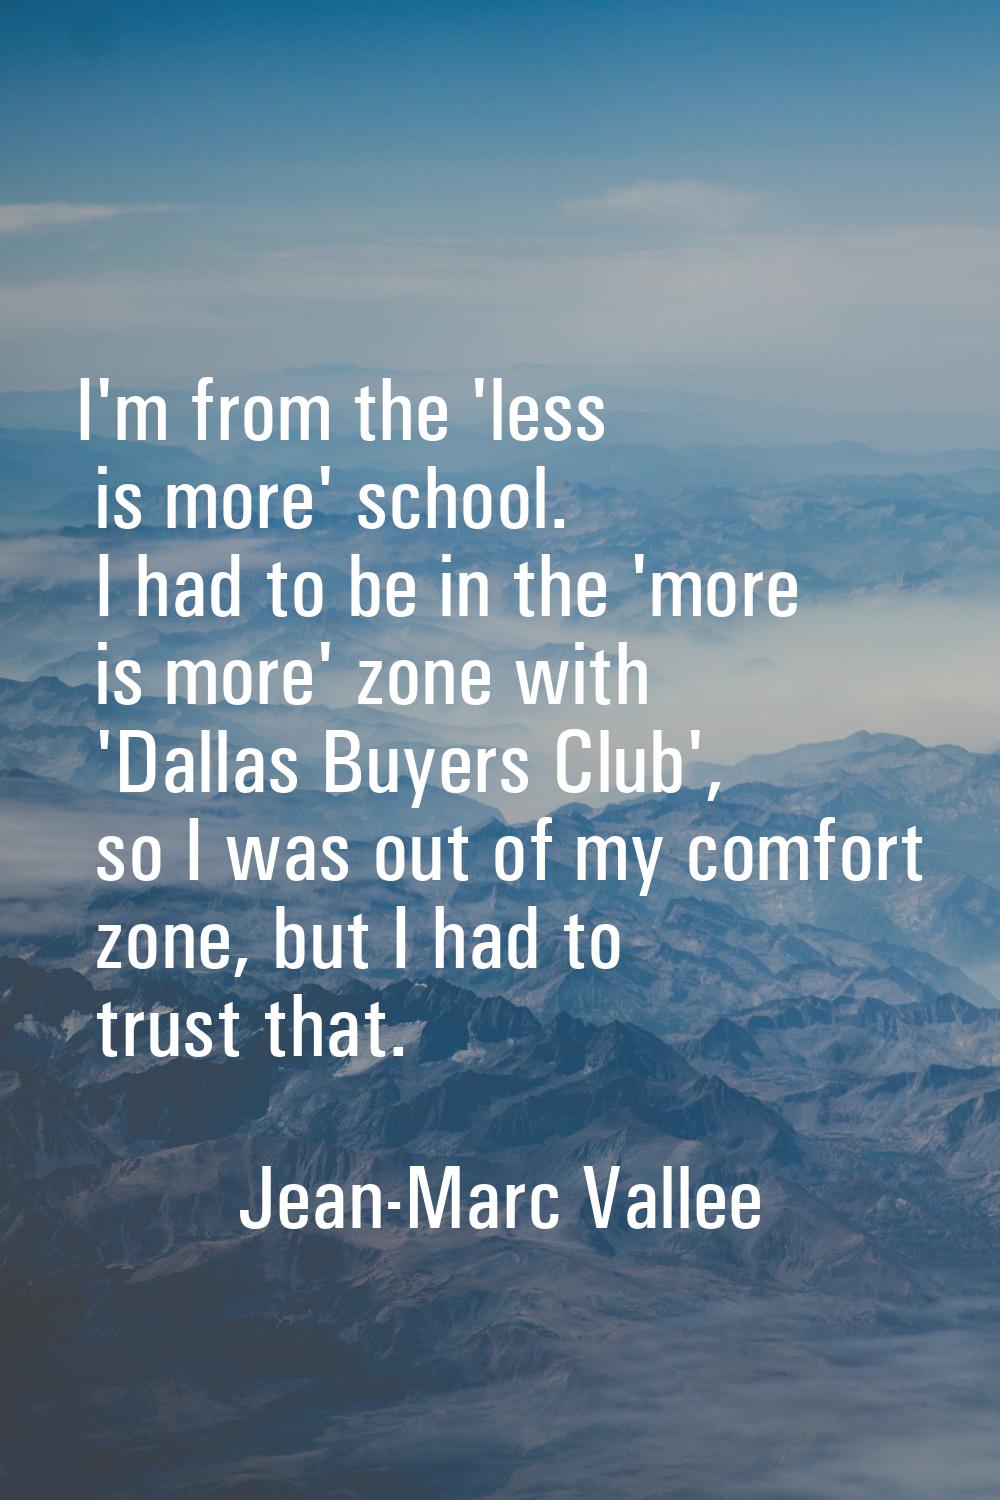 I'm from the 'less is more' school. I had to be in the 'more is more' zone with 'Dallas Buyers Club